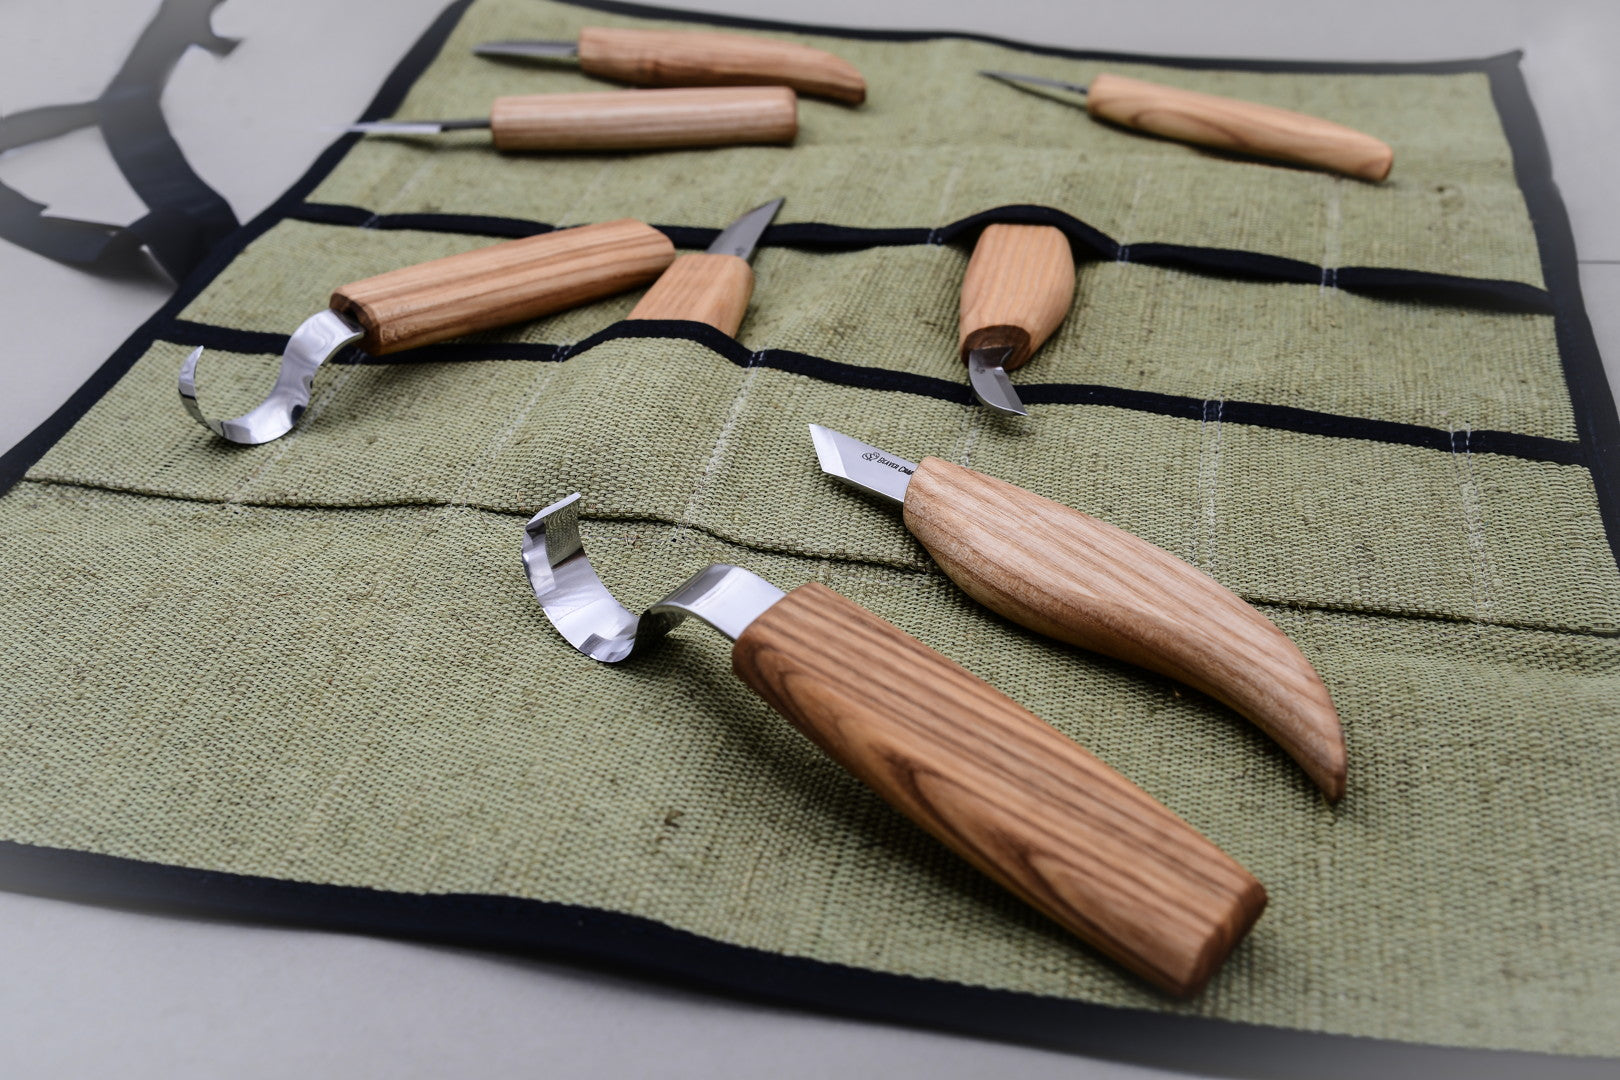 S08 - Wood Carving Set of 8 Knives